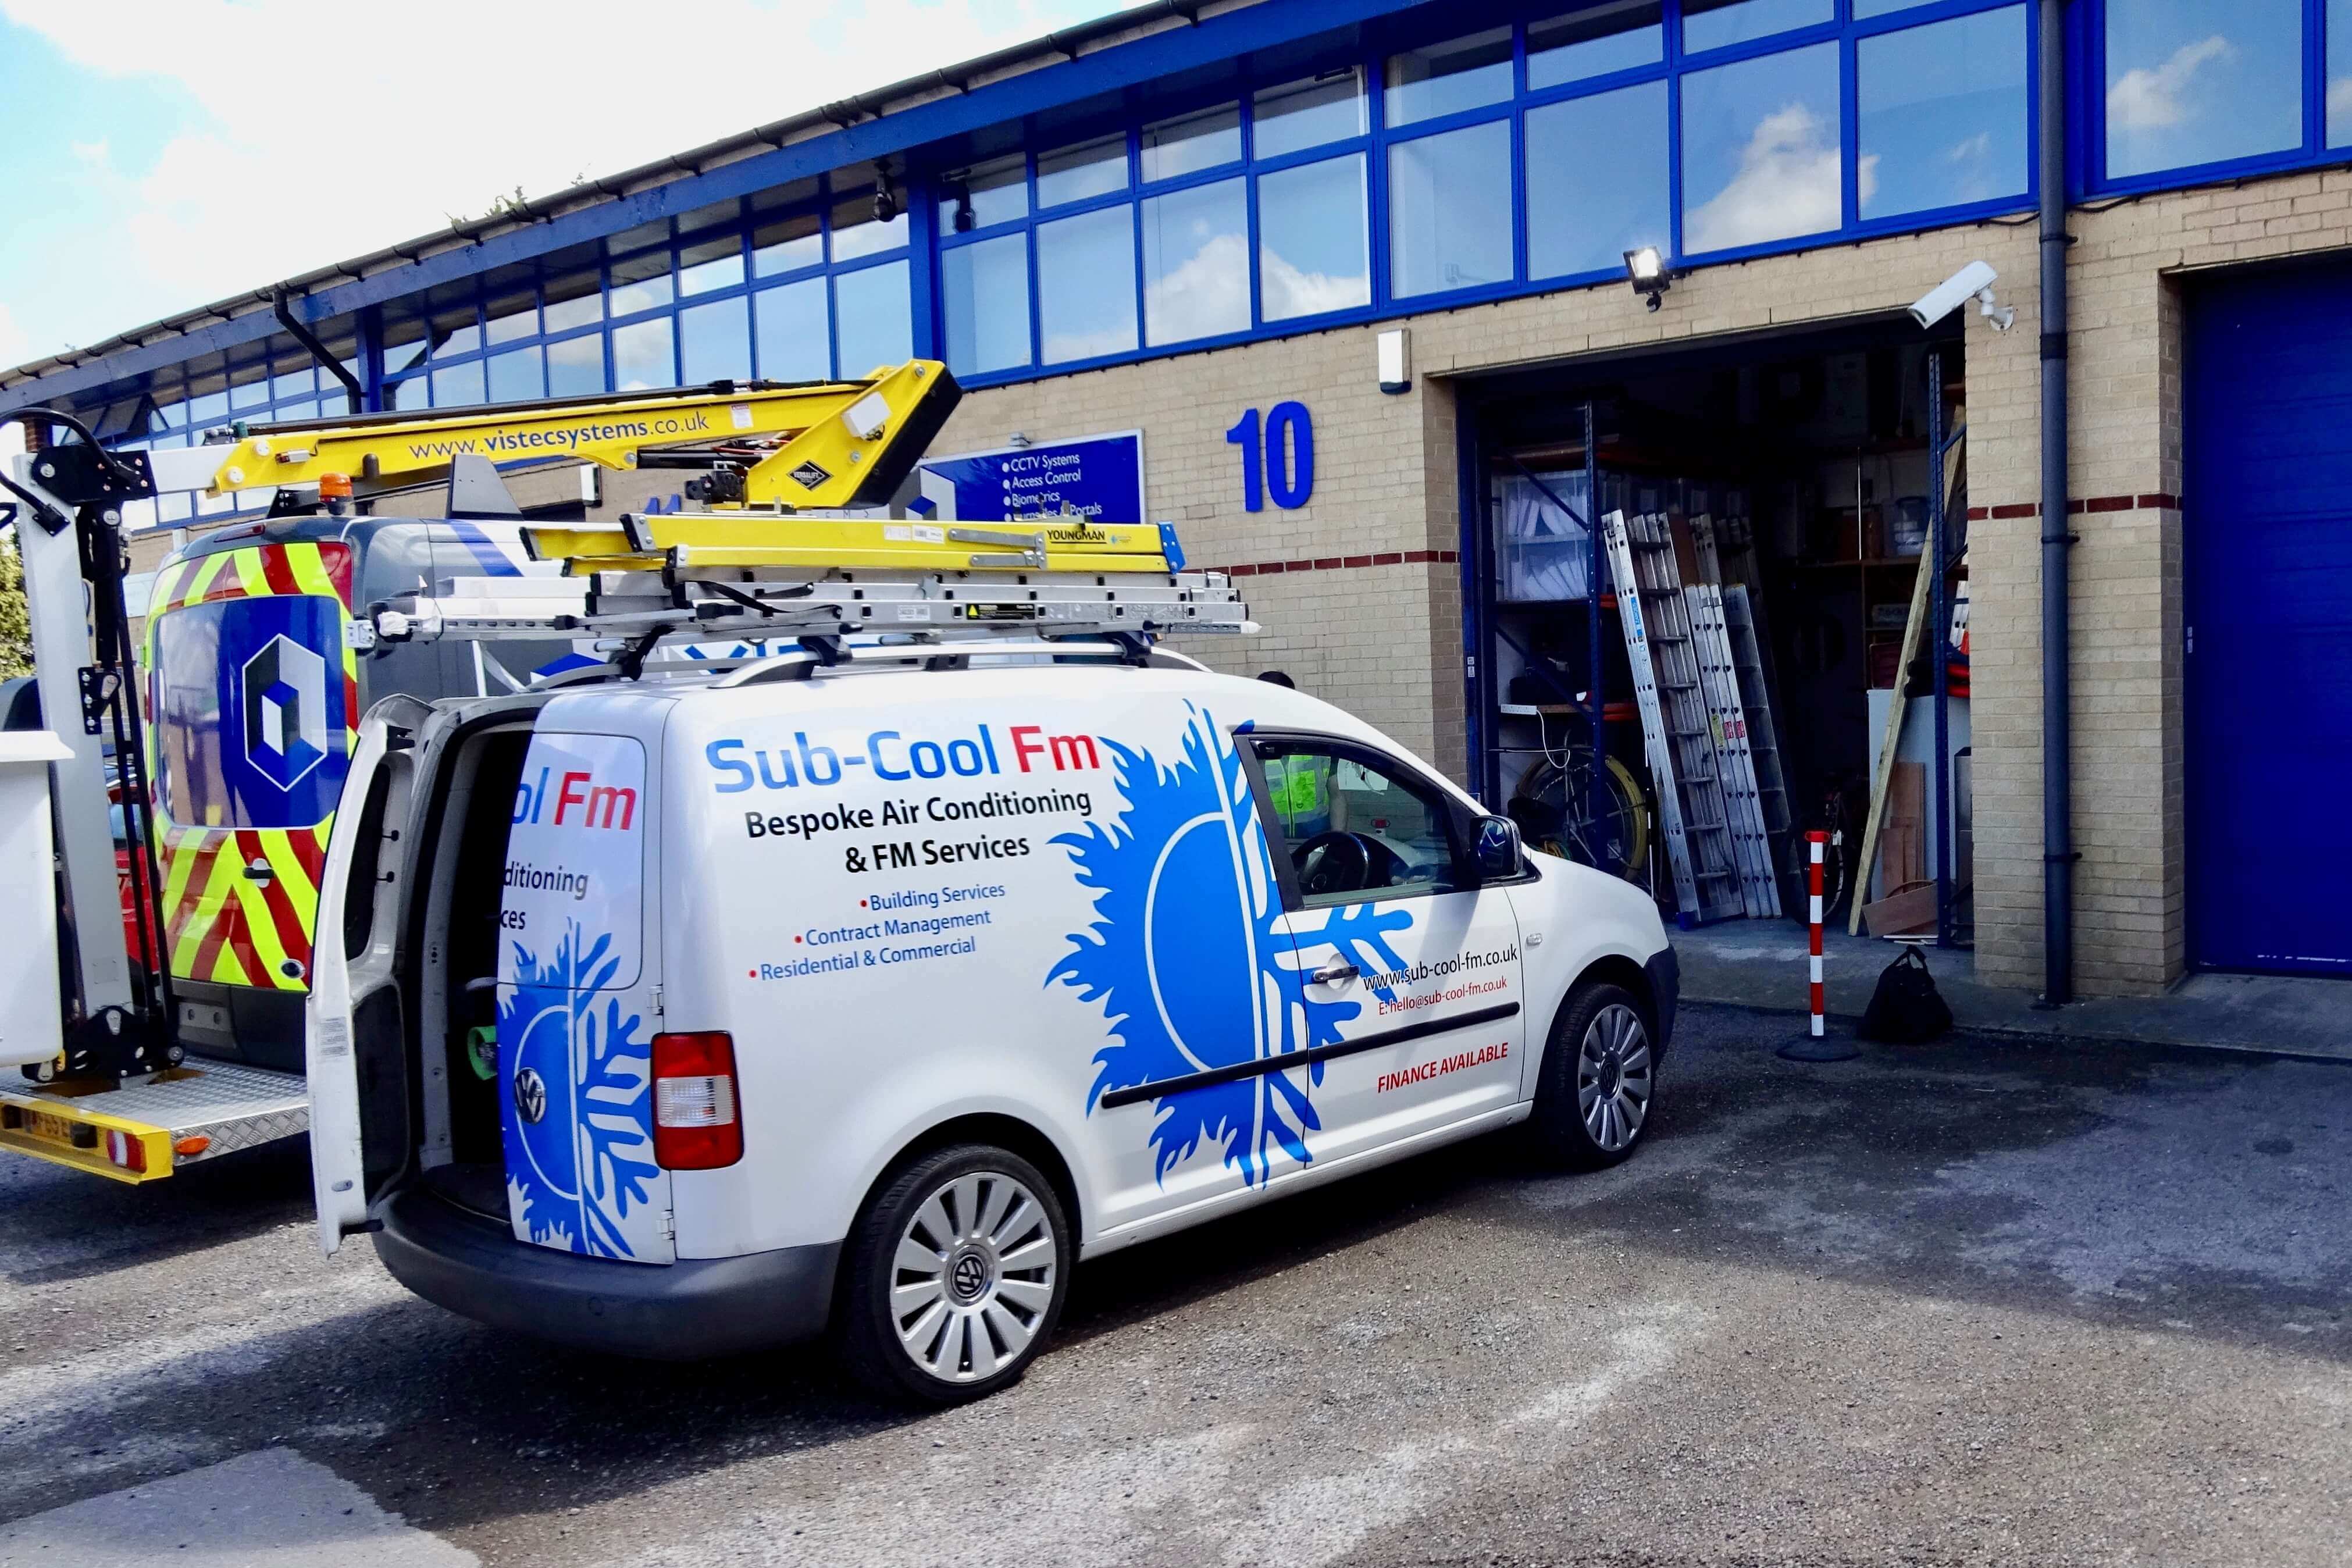 A Sub-Cool FM branded van outside an industrial business unit